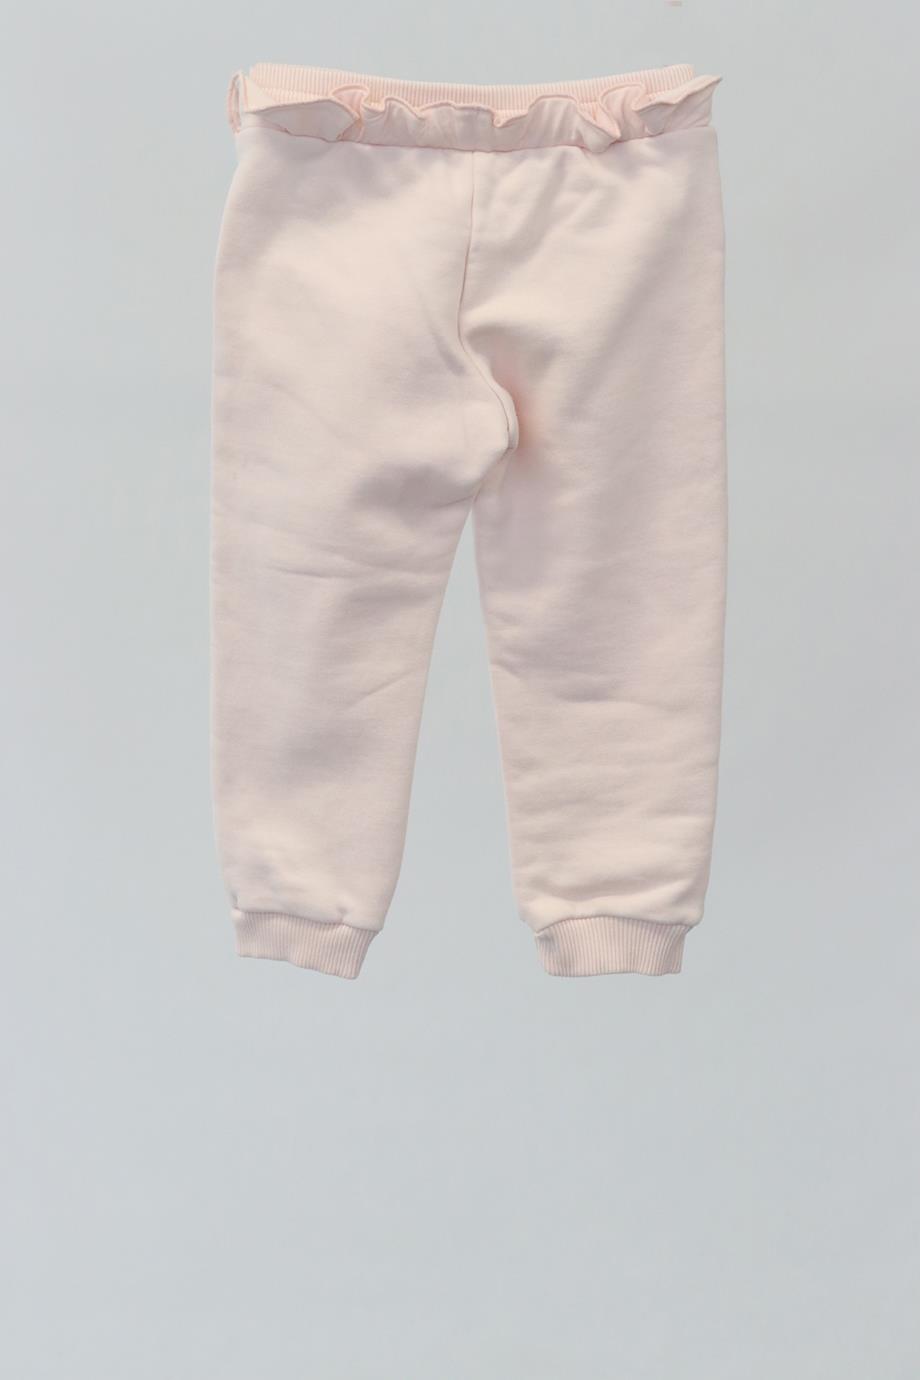 GIVENCHY KIDS GIRLS COTTON TRACK PANTS 2 YEARS